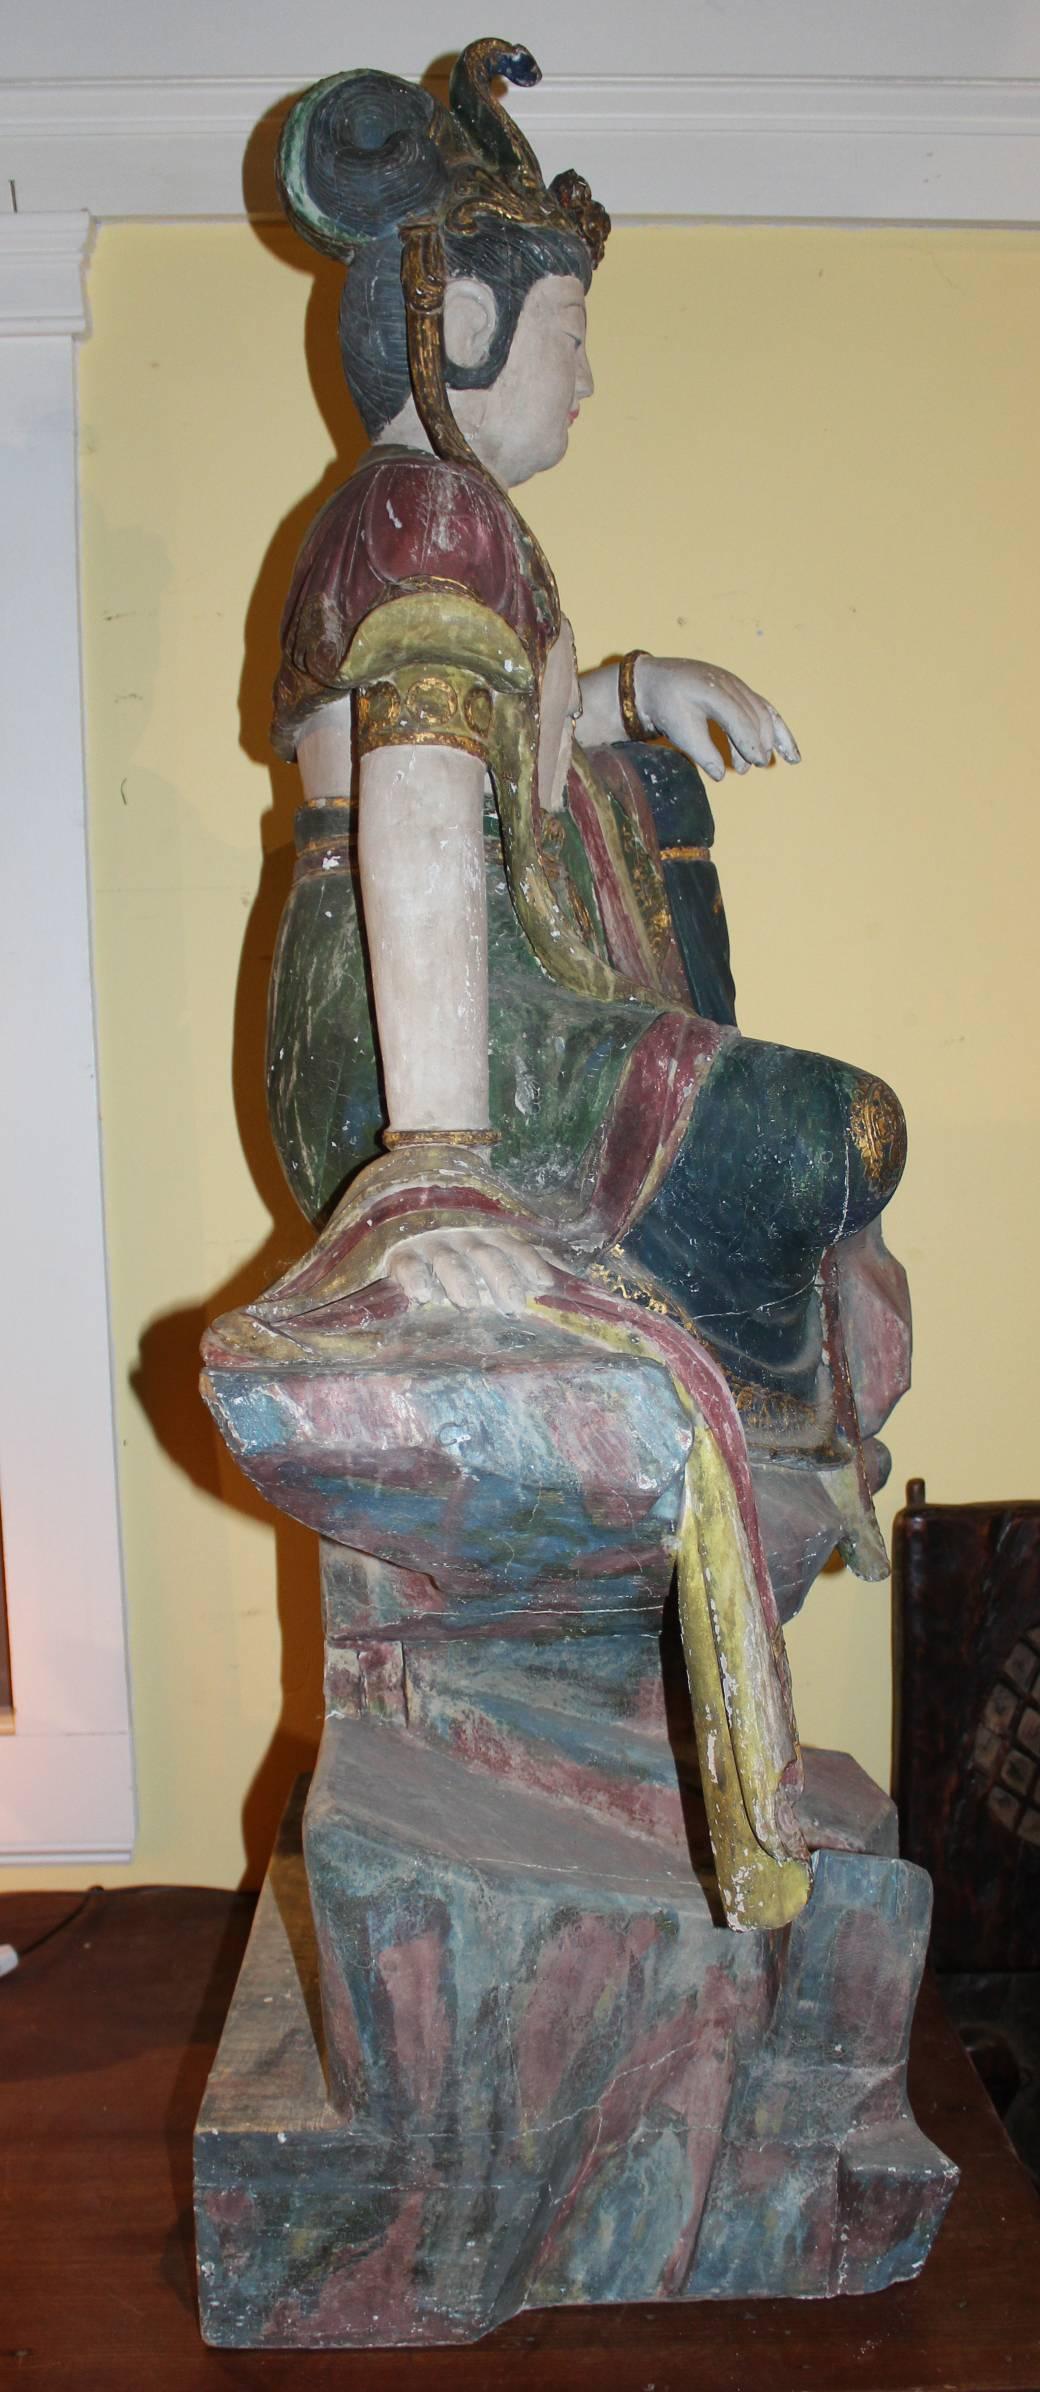 East Asian Polychrome Carved Wooden Seated Figure of Guanyin